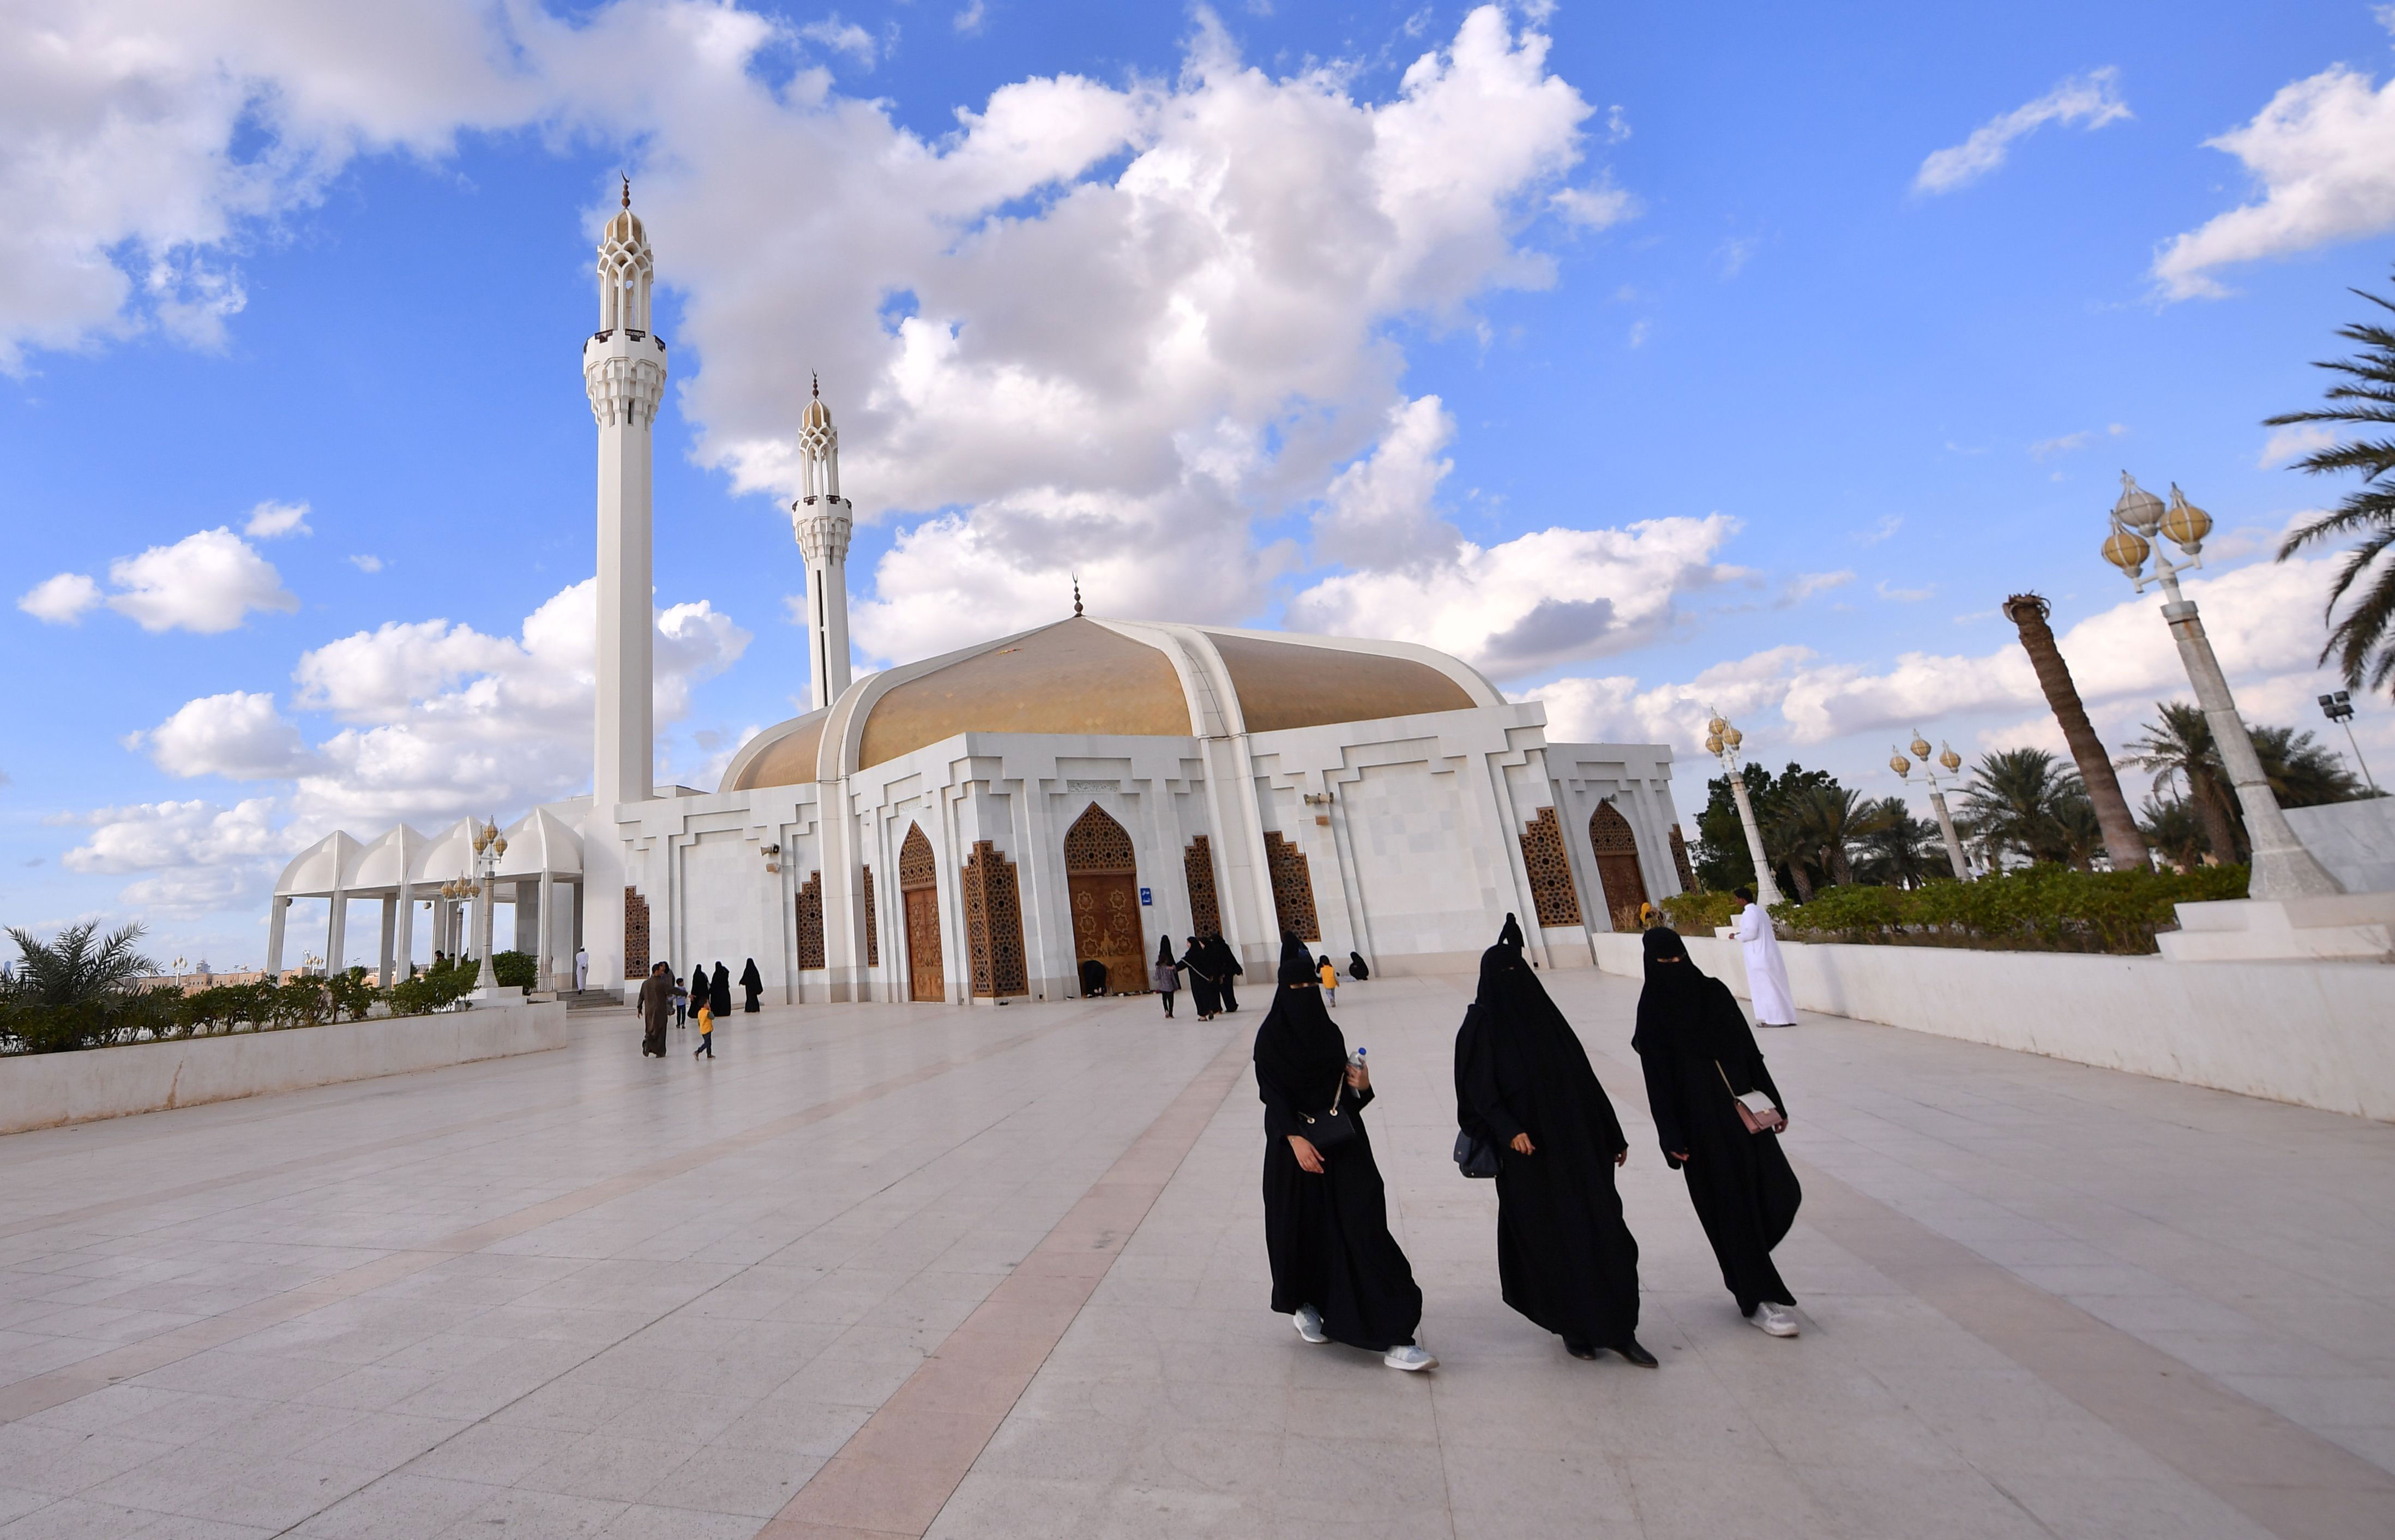 Visitors&nbsp;on the esplanade outside the Hasan Anani mosque in Jeddah, Saudi Arabia.